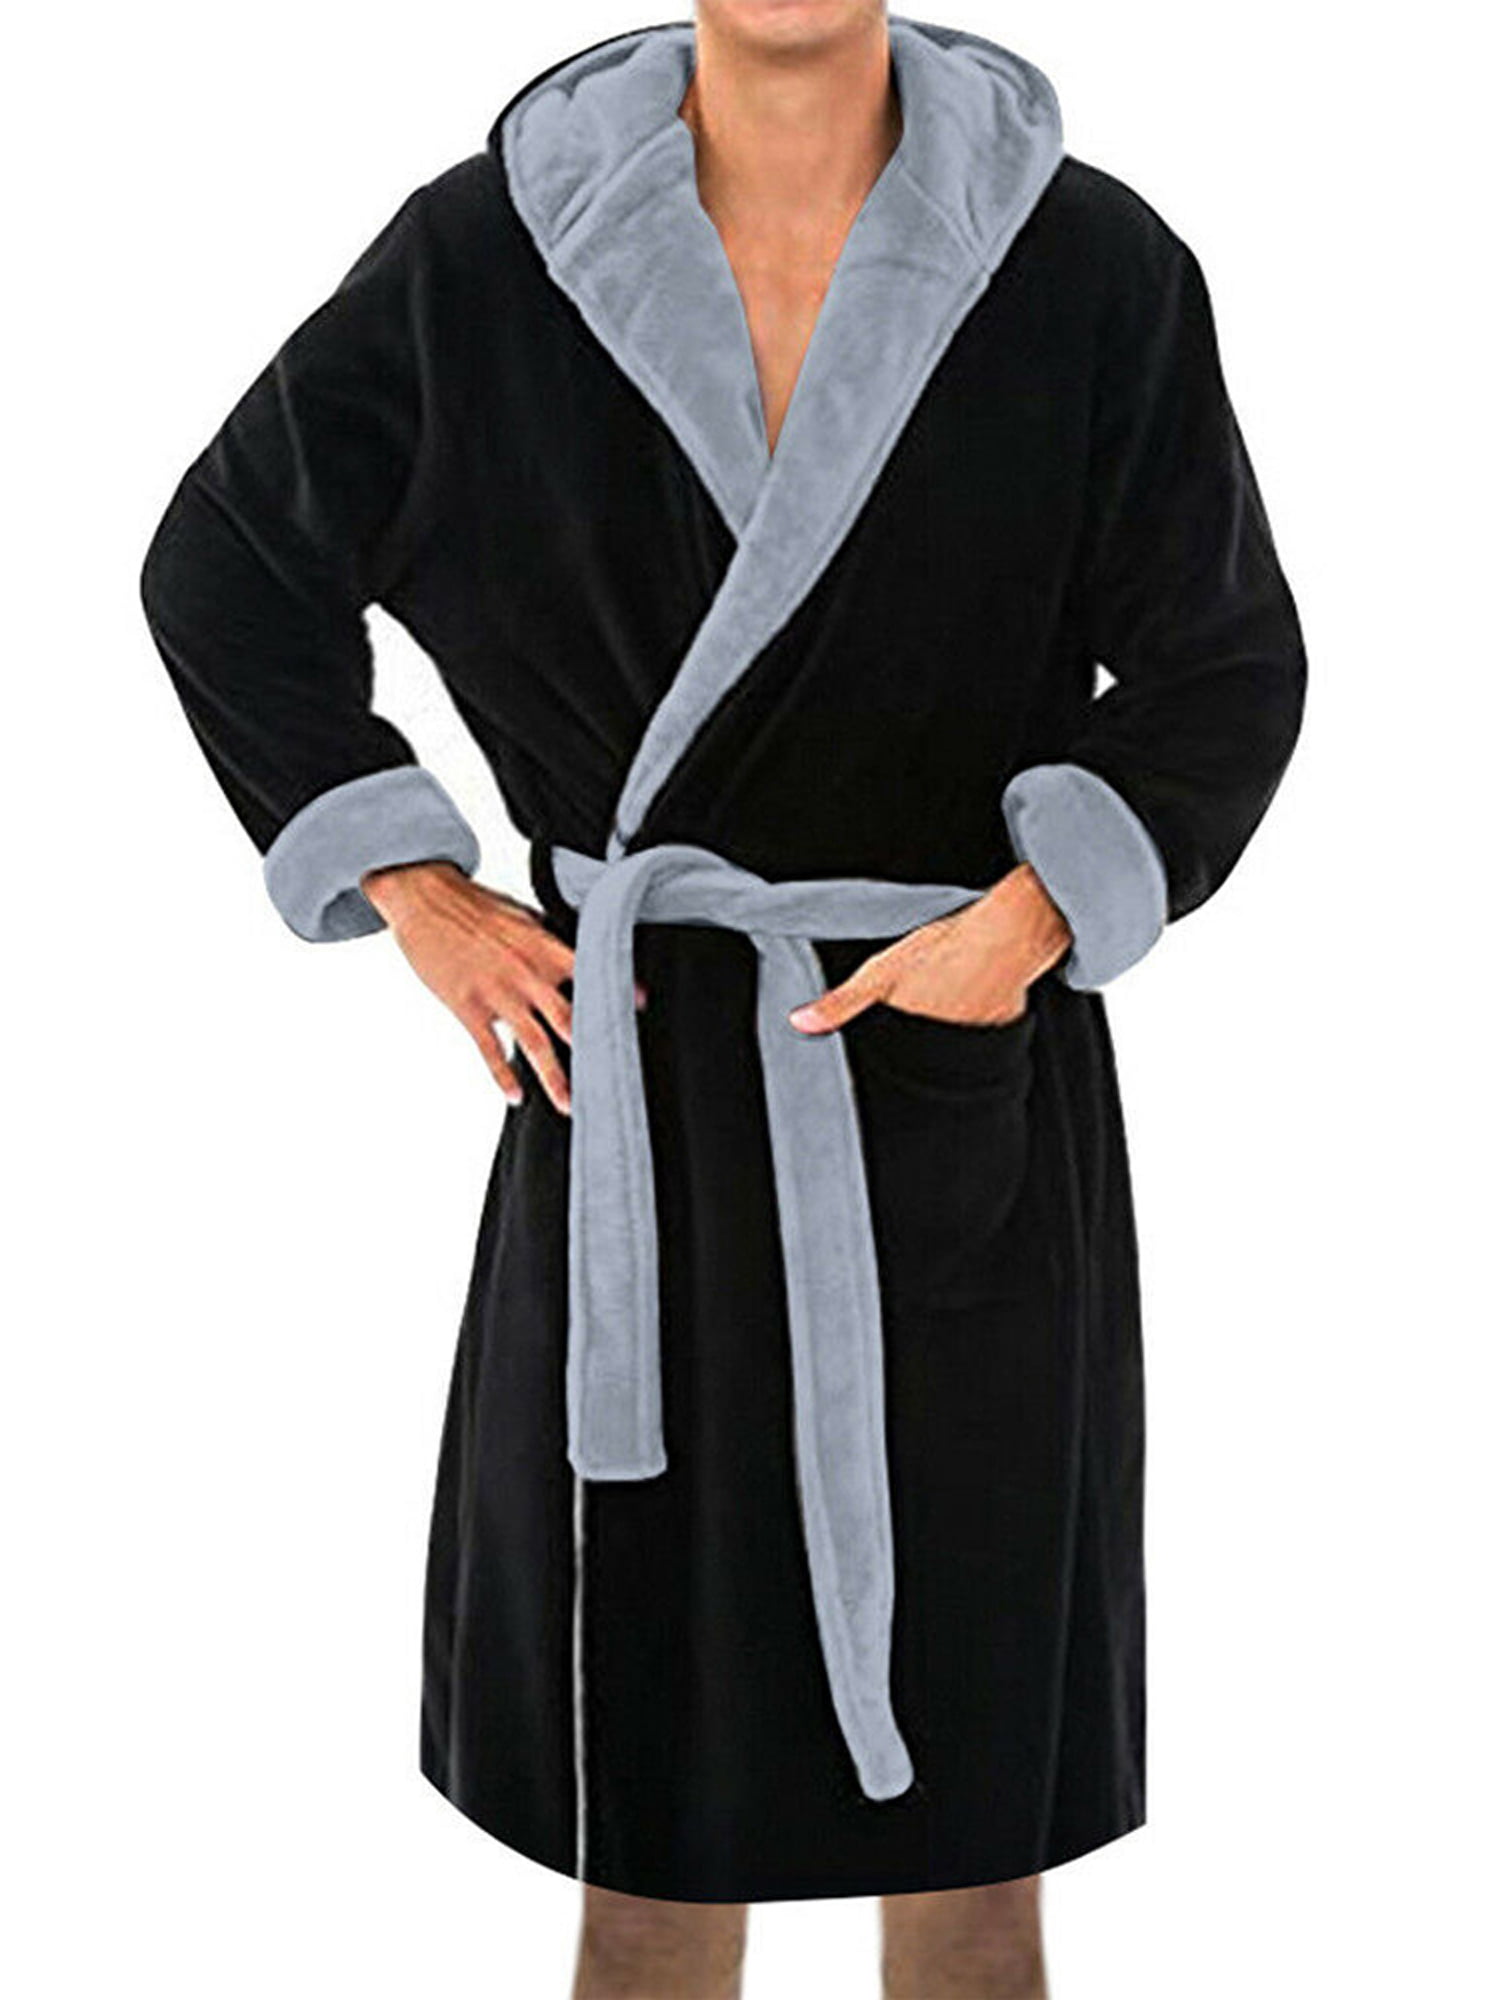 Mens Luxury Soft Hooded dressing gown robe Tie Front Pockets Size Medium to 5XL 